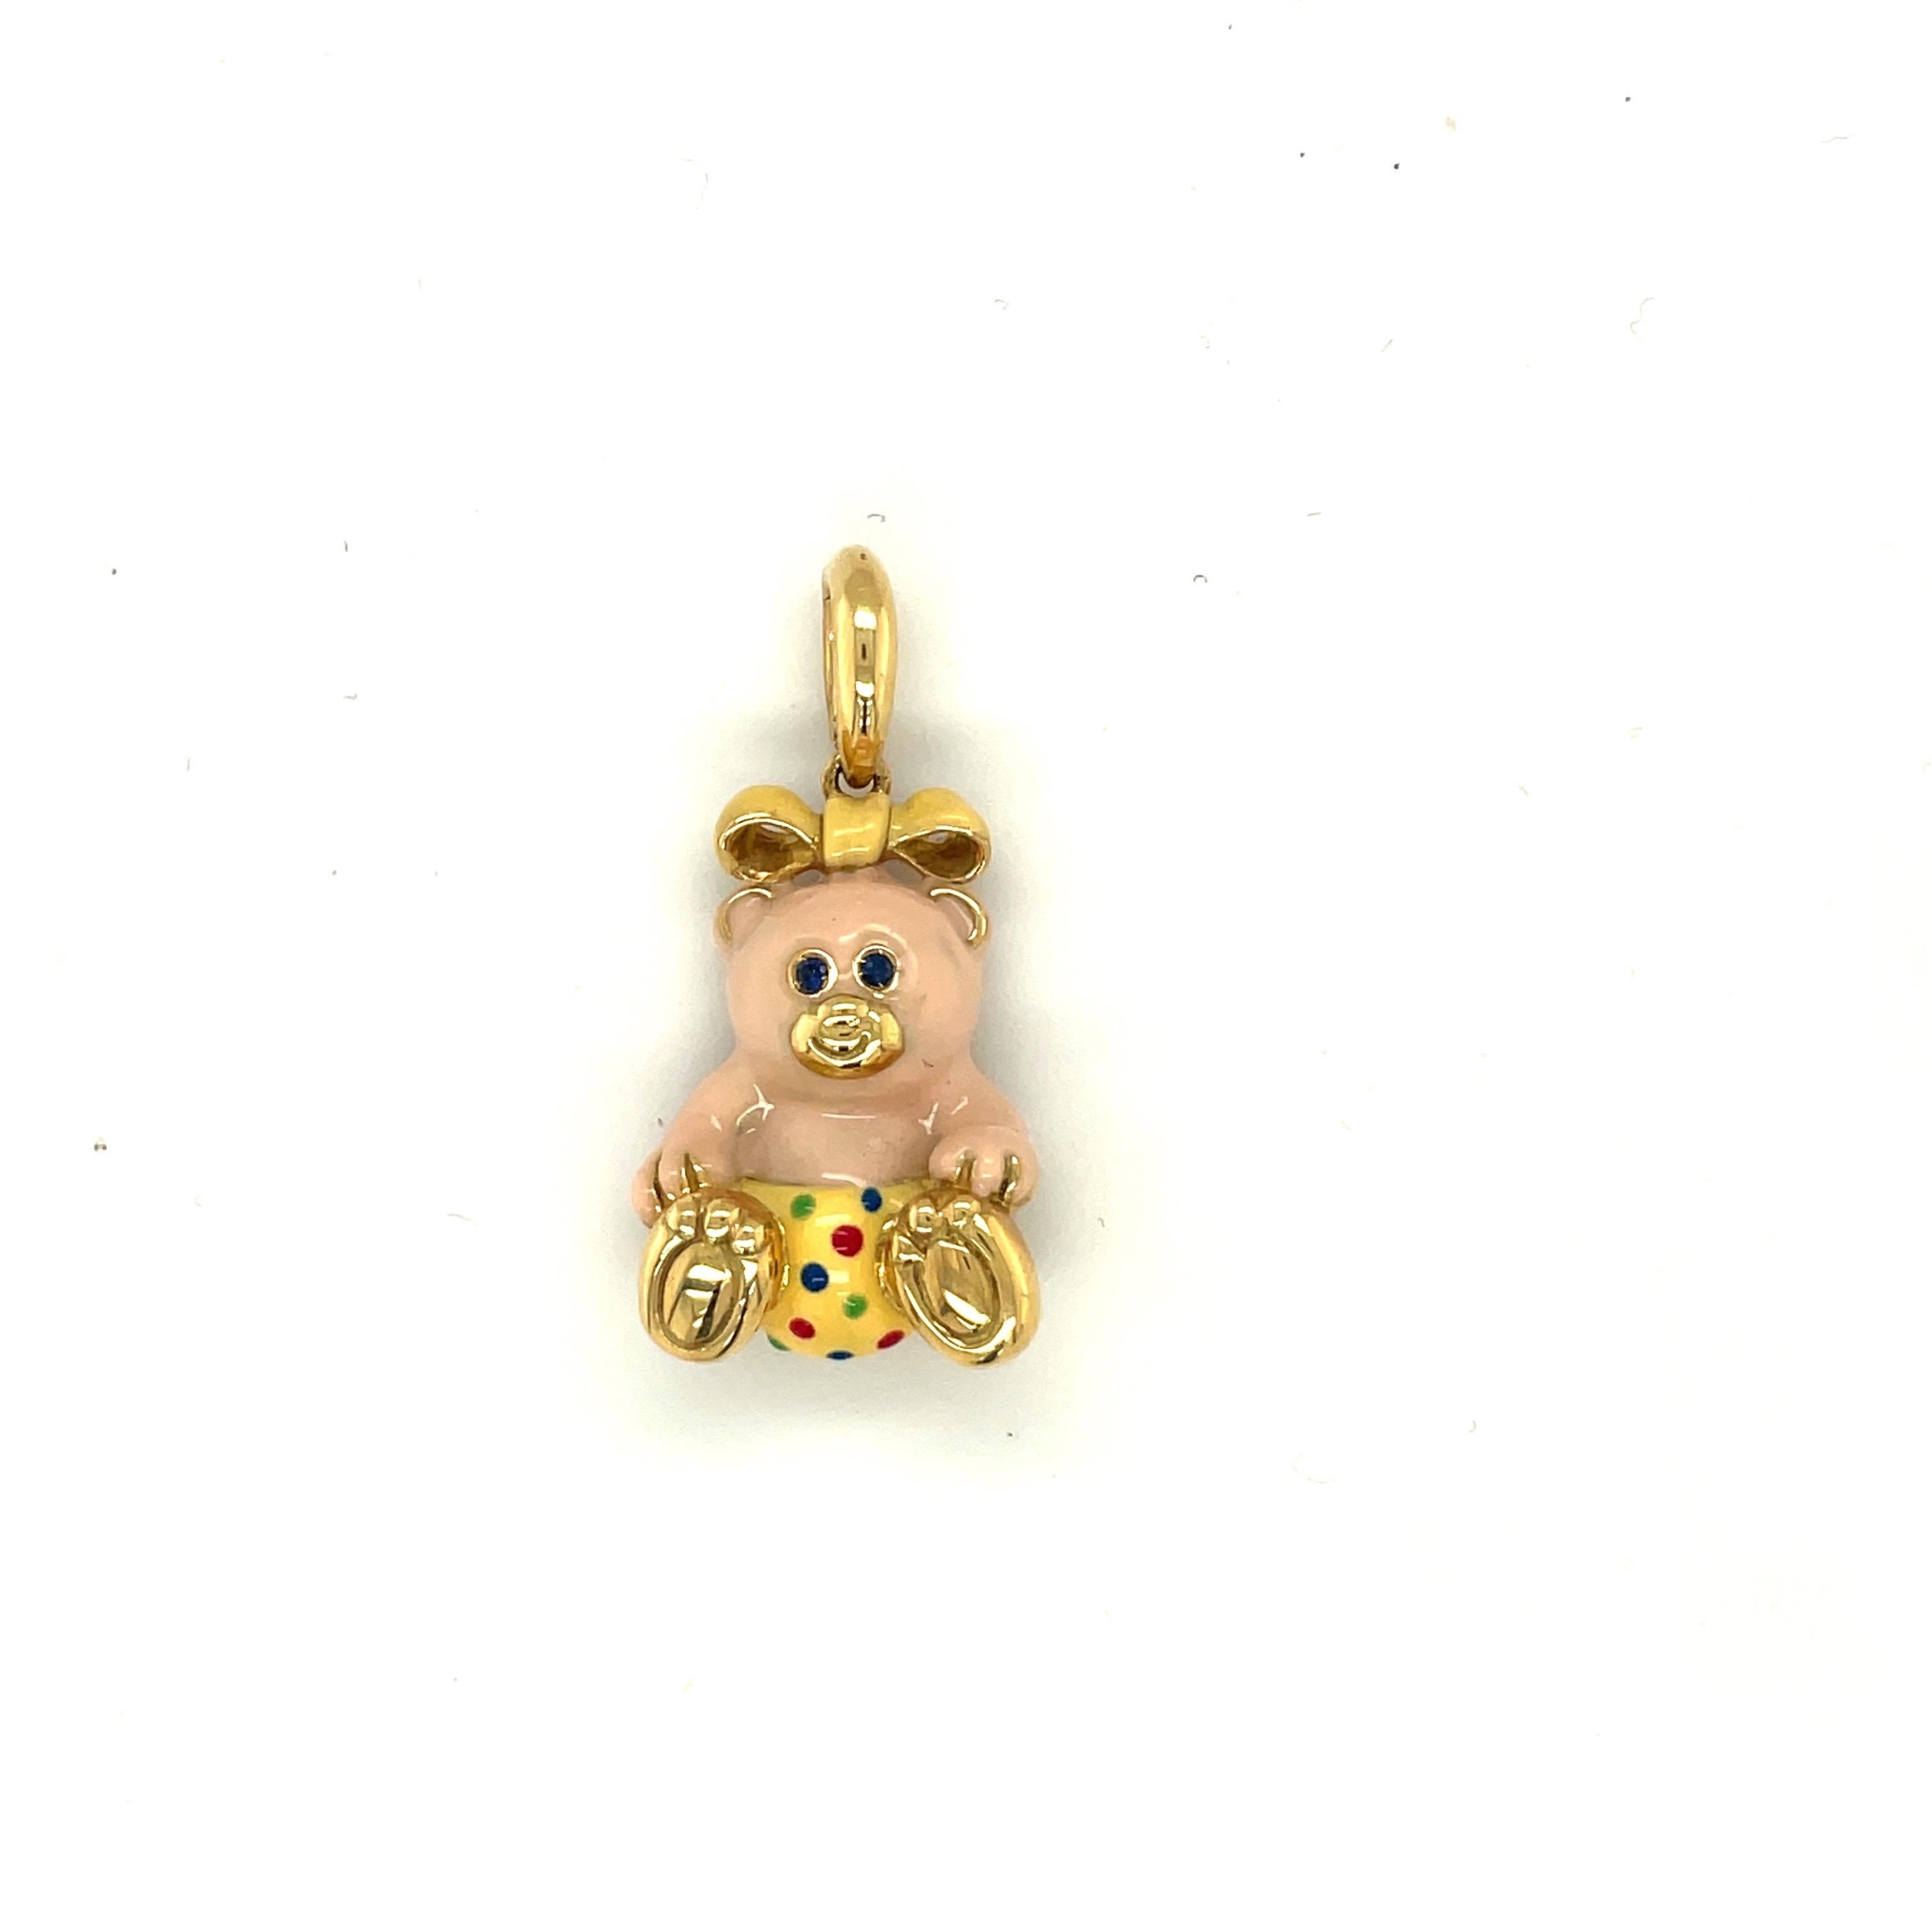 Just the cutest....Teddy bear charm made exclusively for Cellini by Ambrosi of Italy.

This 18 karat yellow gold teddy bear charm is crafted with a light pink enamel for the body. Her outfit is a soft yellow with red, blue, and green polka dots. She